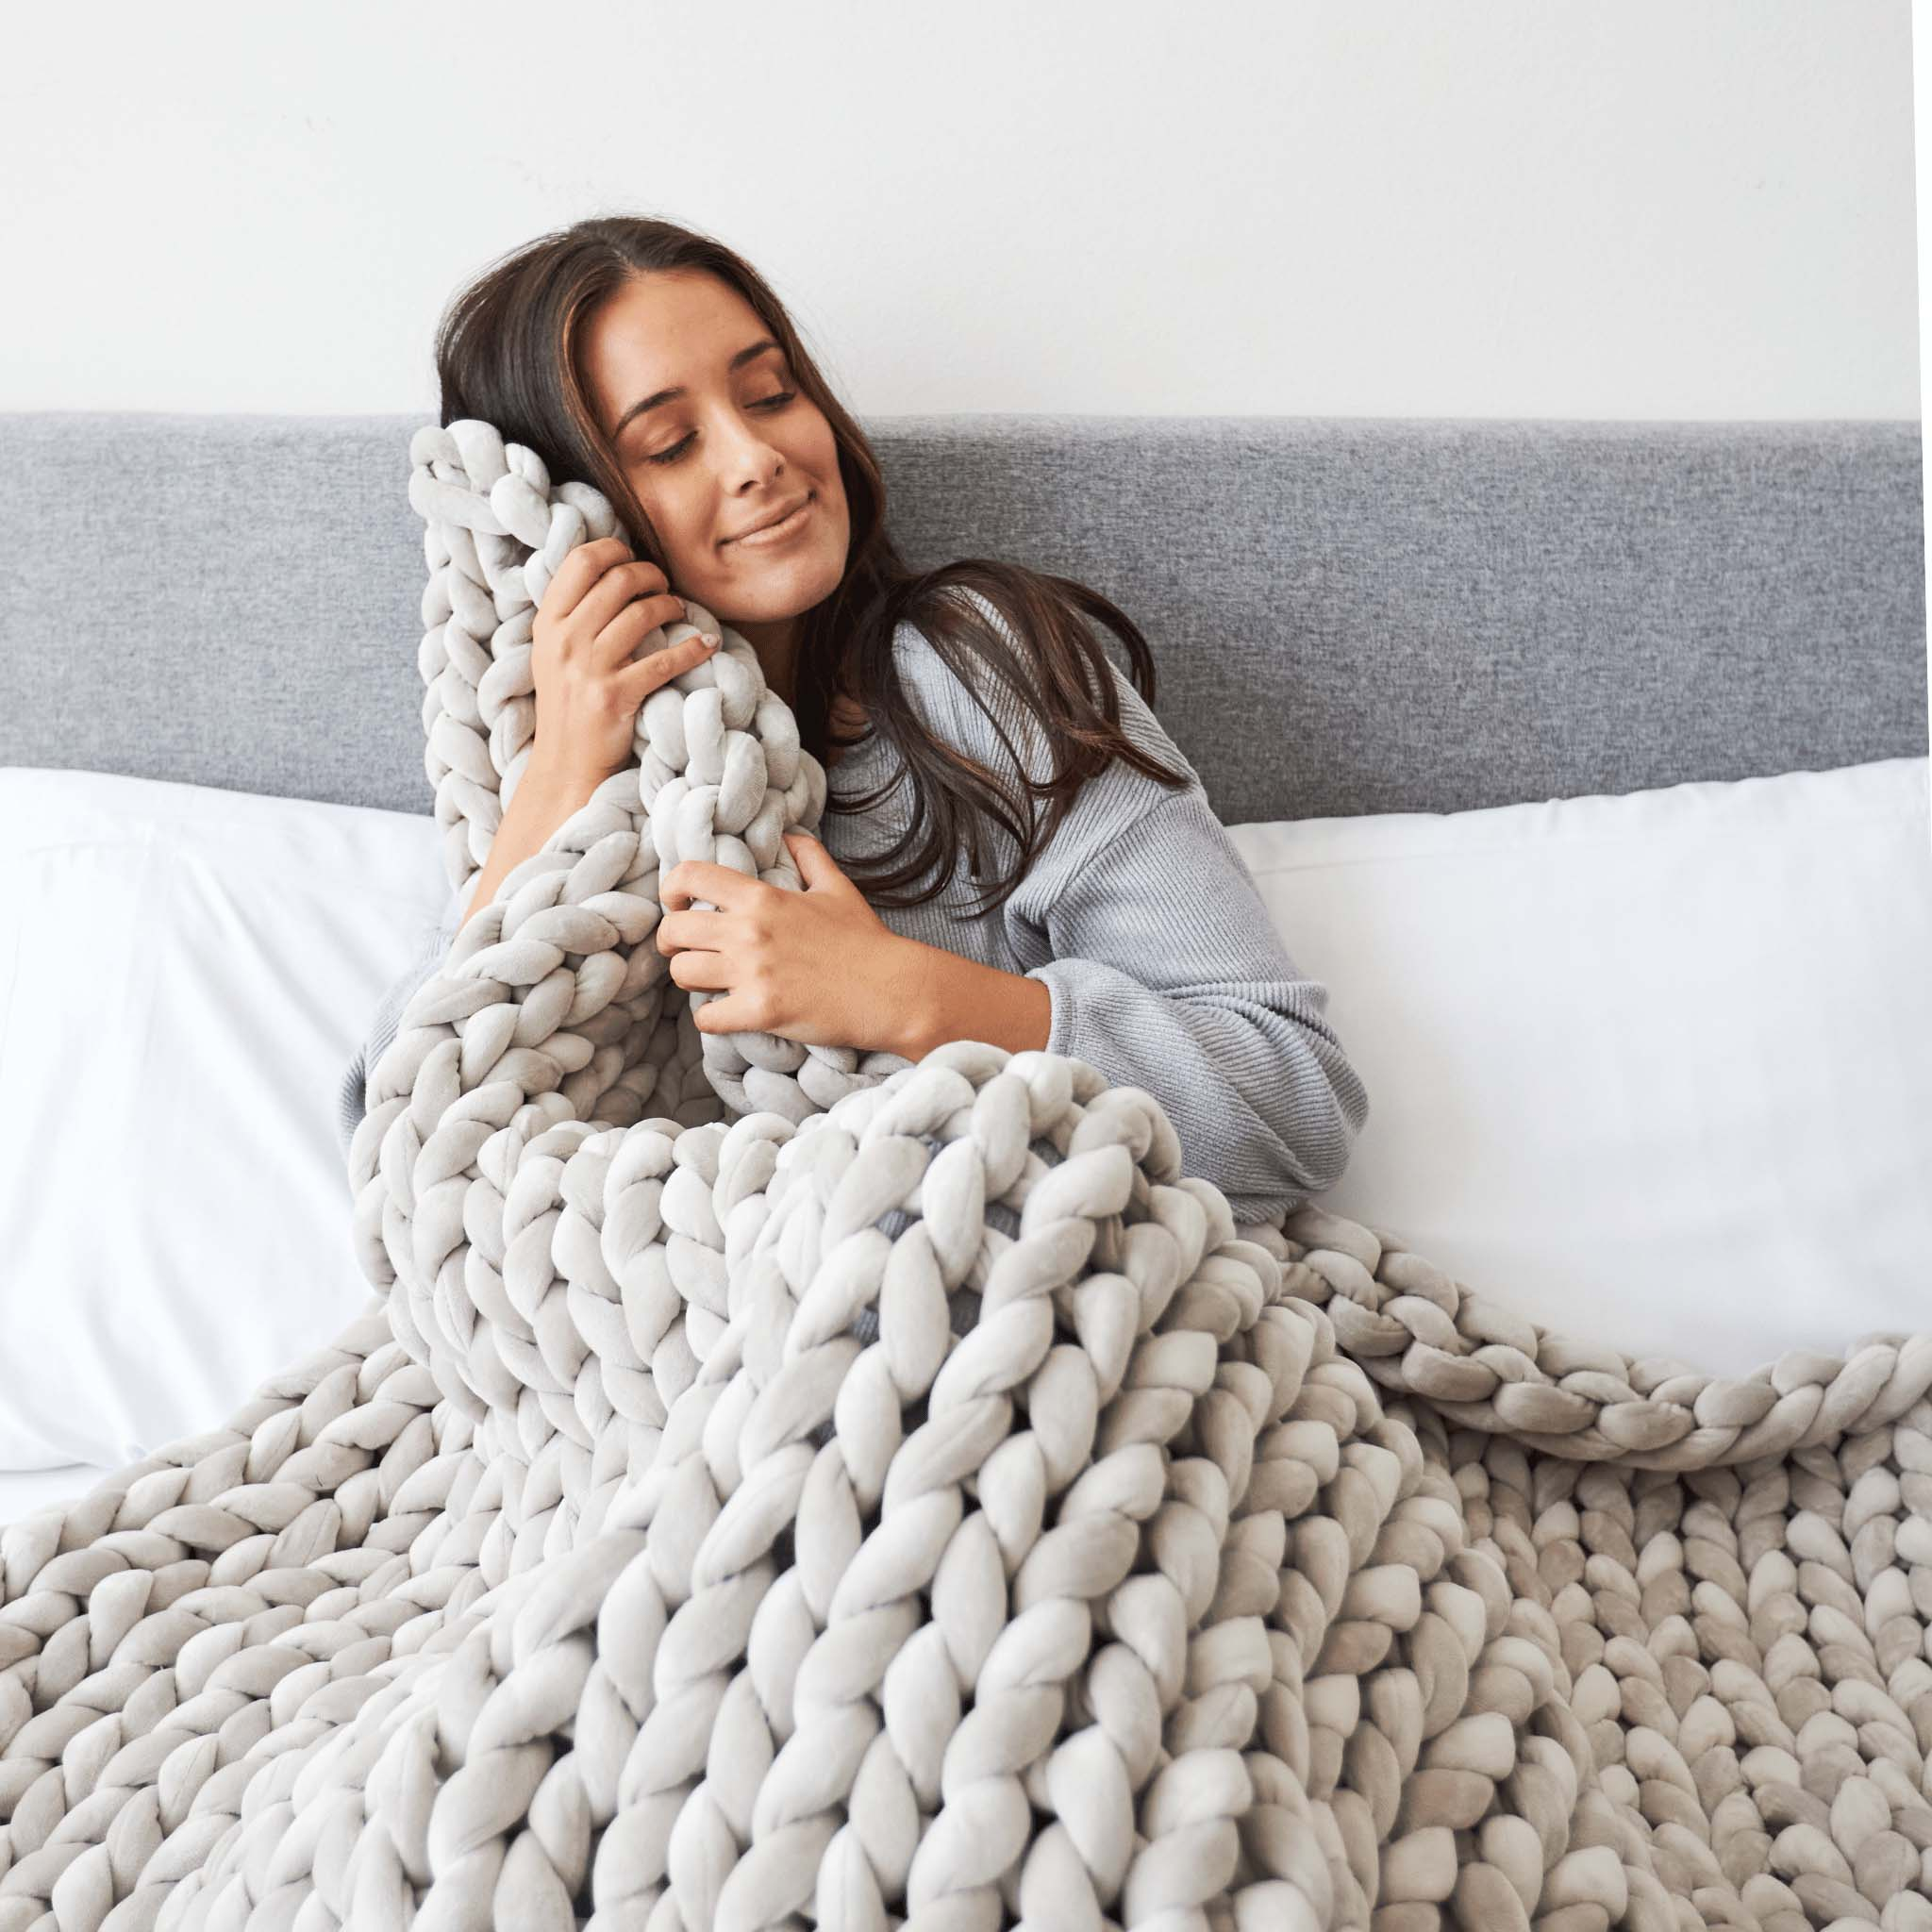 How to Make a Weighted Blanket - Full Guide